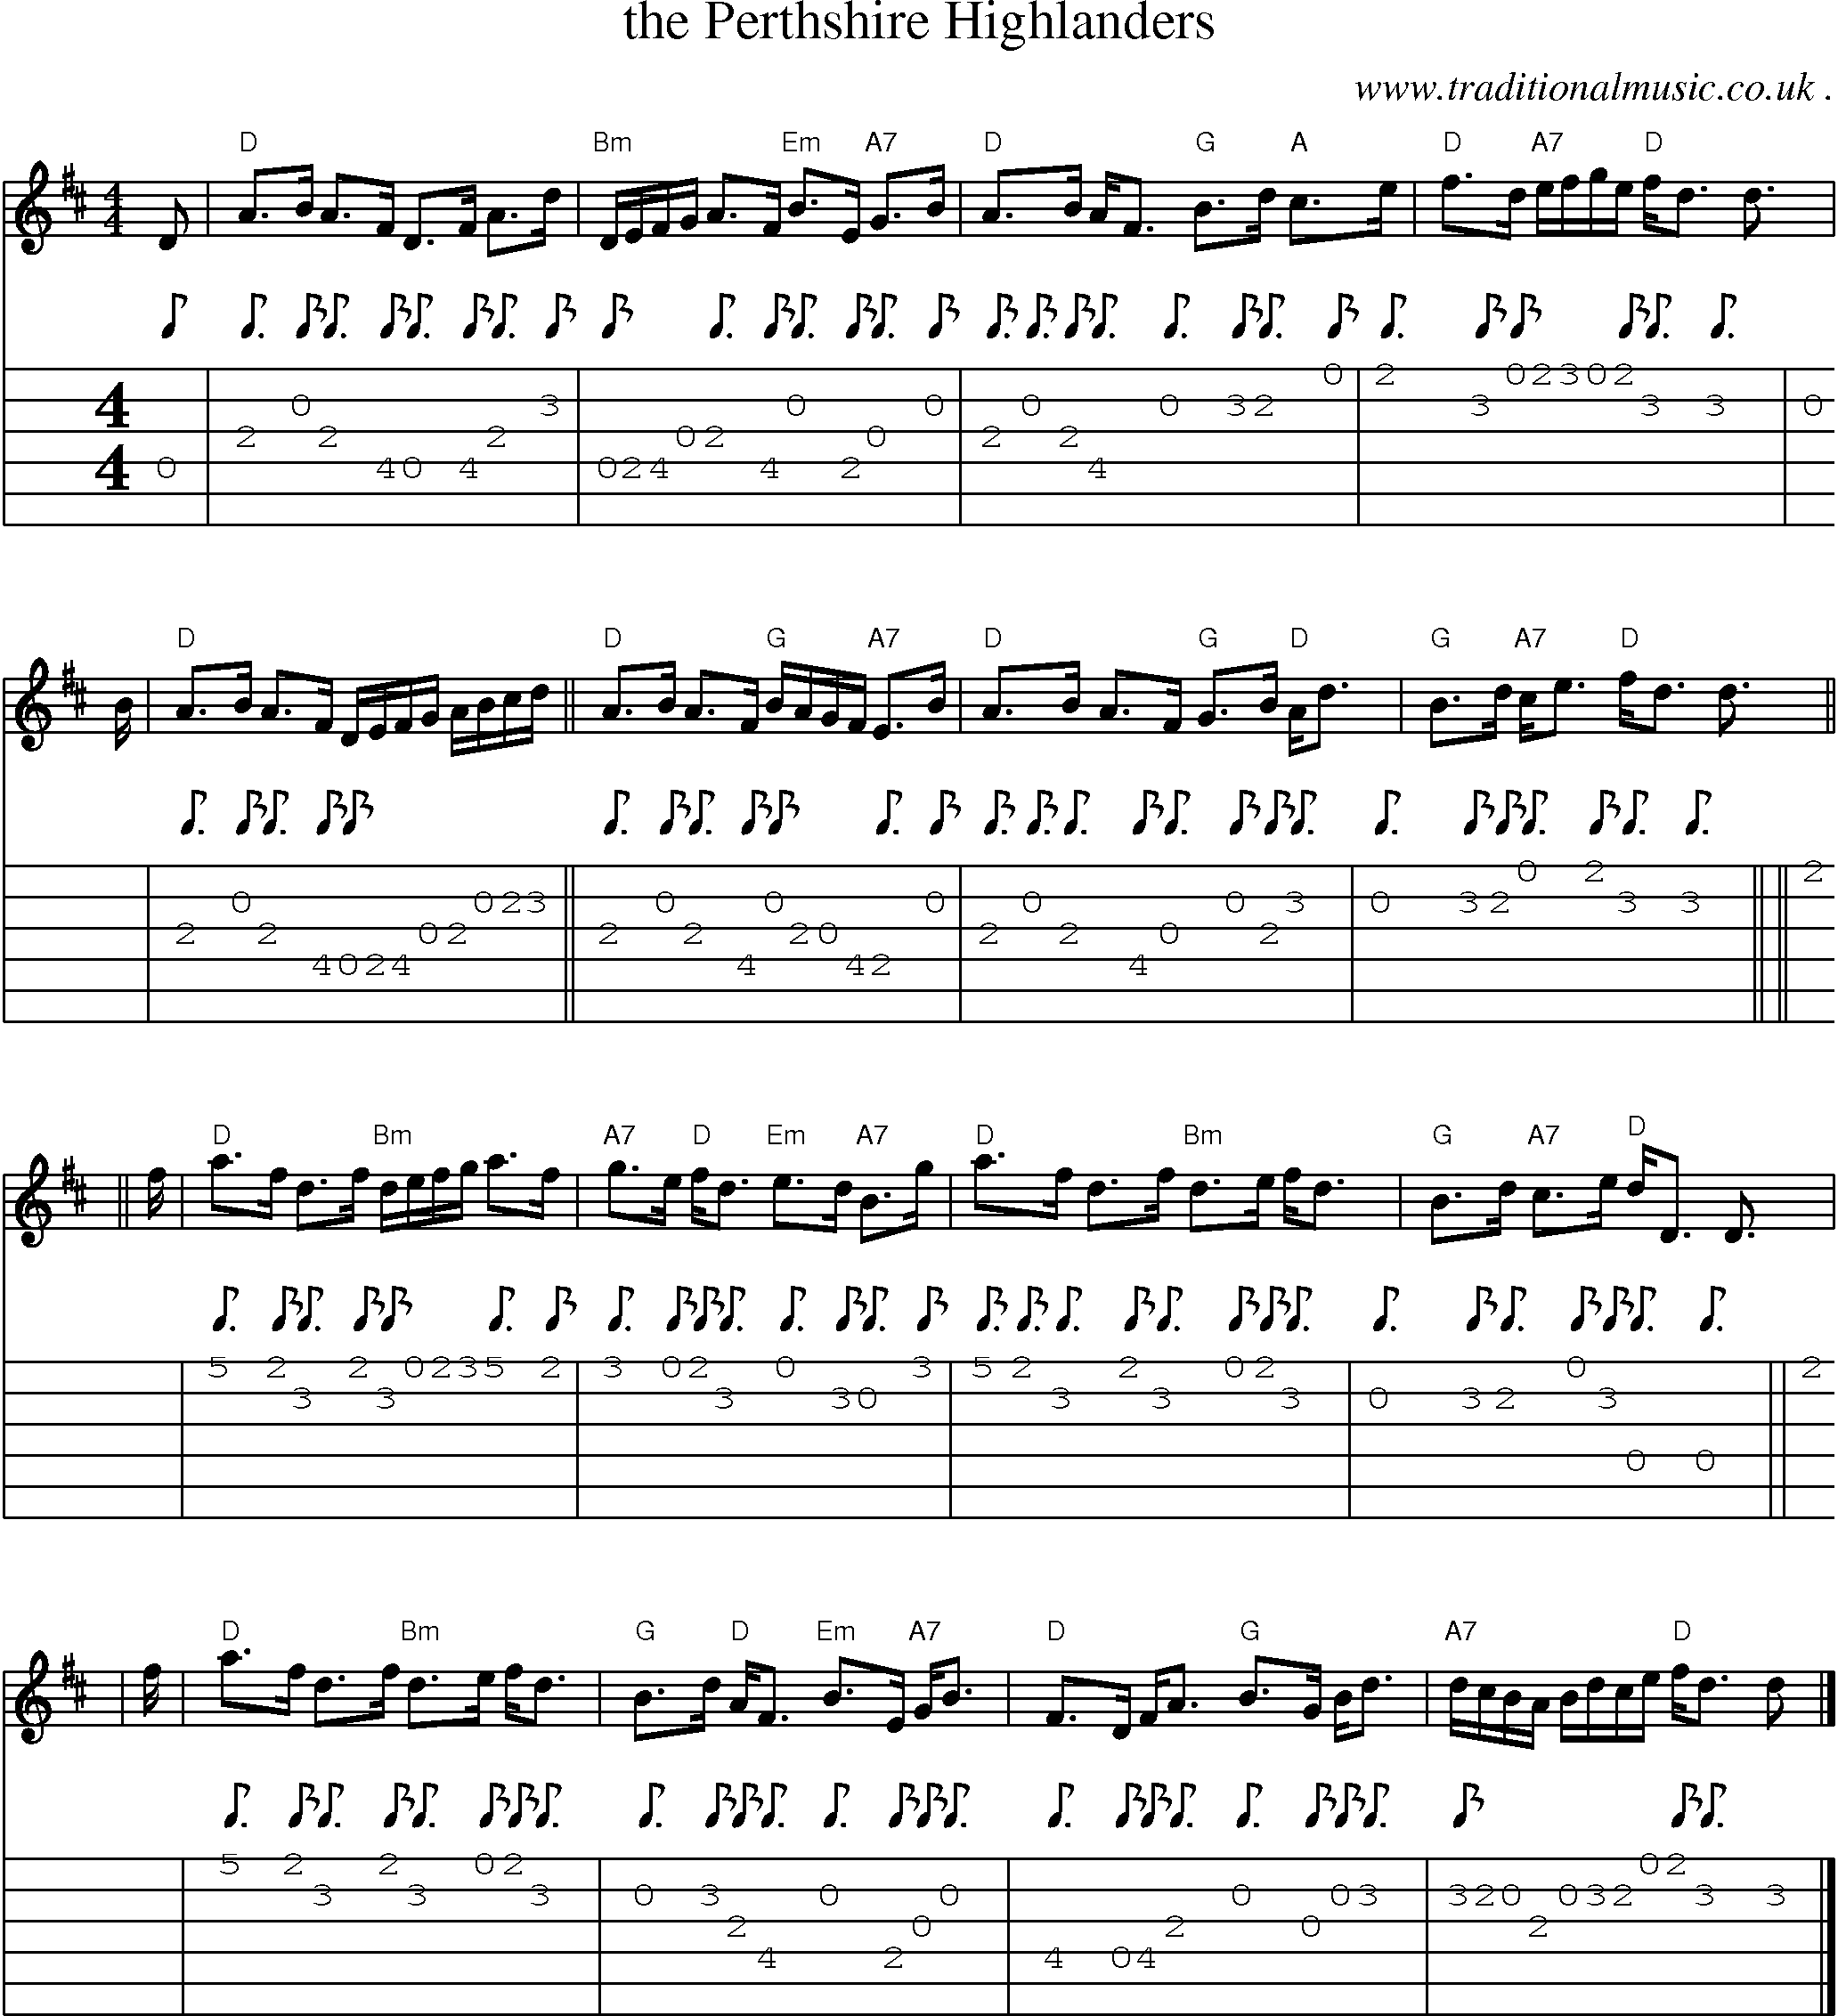 Sheet-music  score, Chords and Guitar Tabs for The Perthshire Highlanders